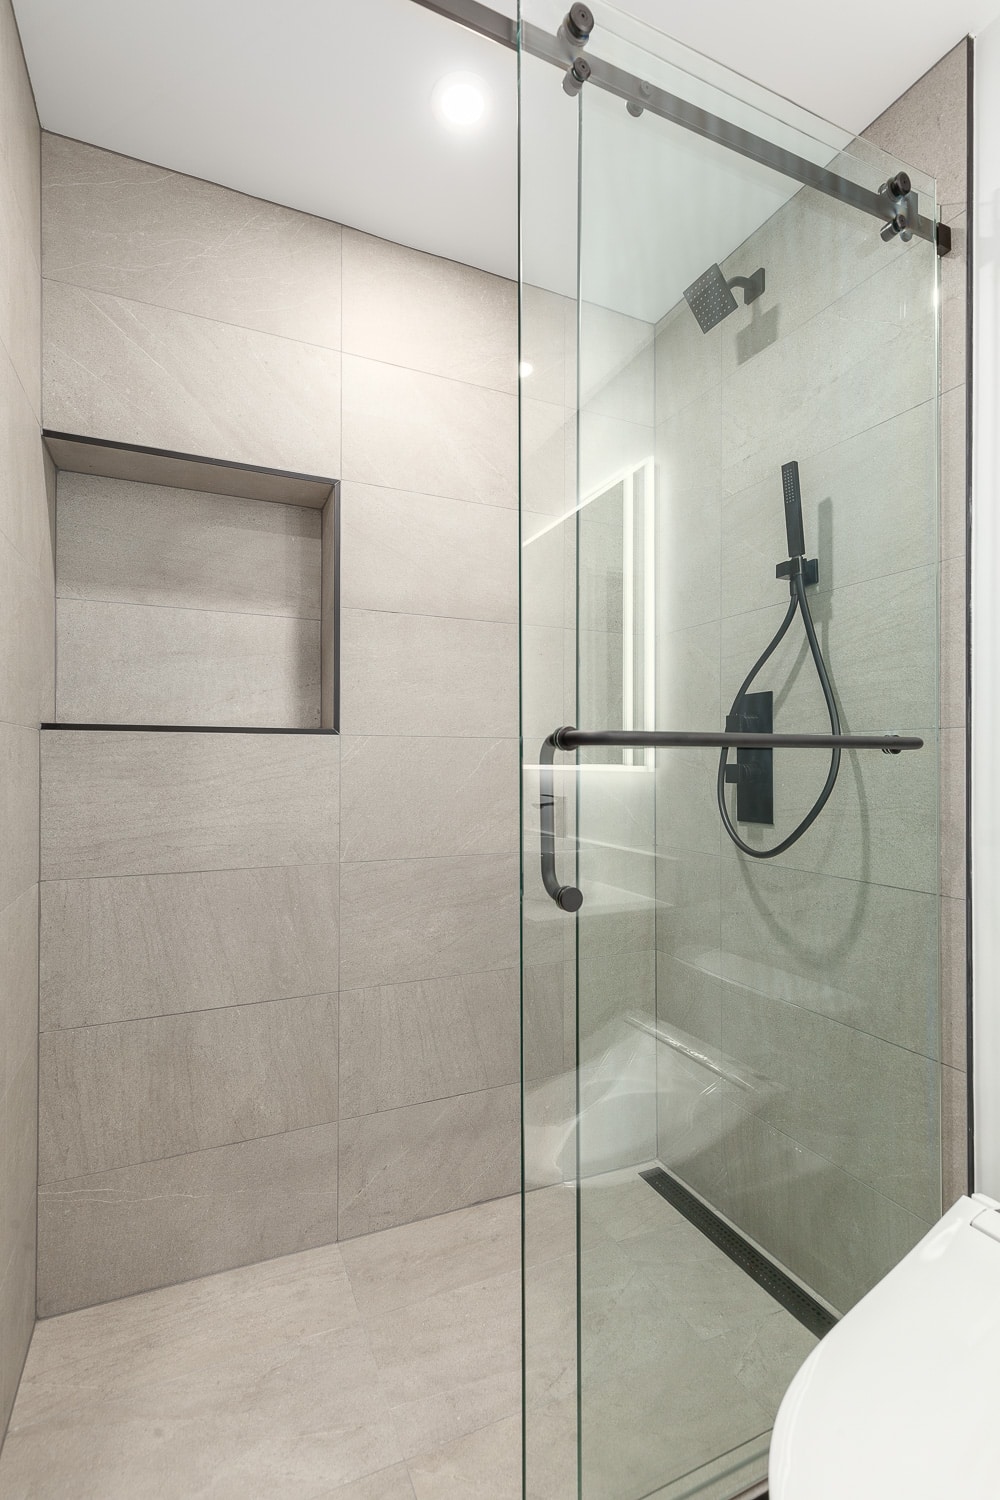 
Full-service bathroom remodeling Vancouver